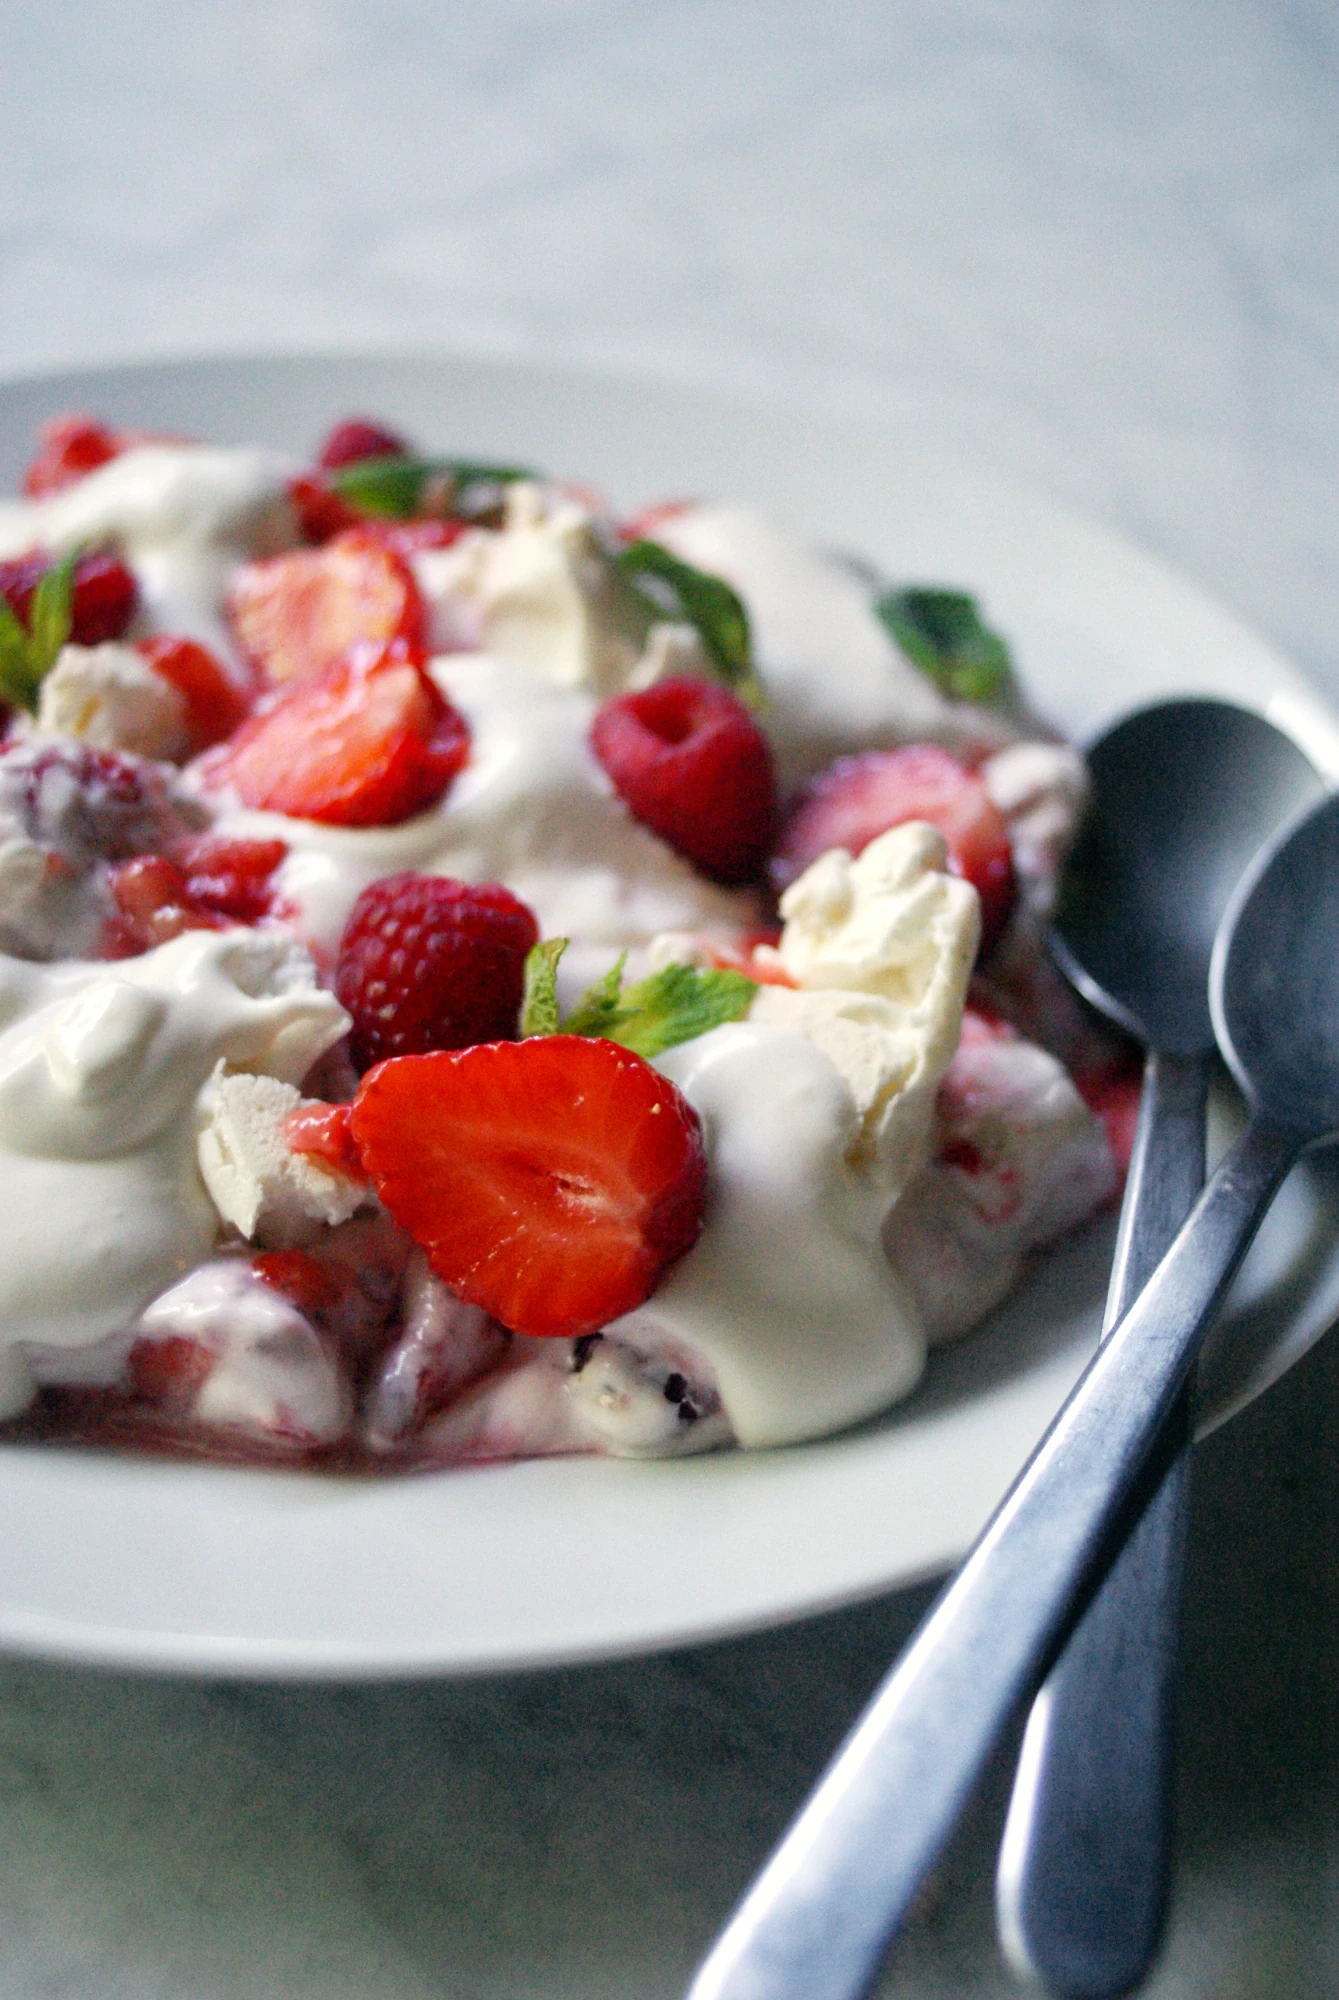 The Perfect Eton Mess with Strawberries and Raspberries